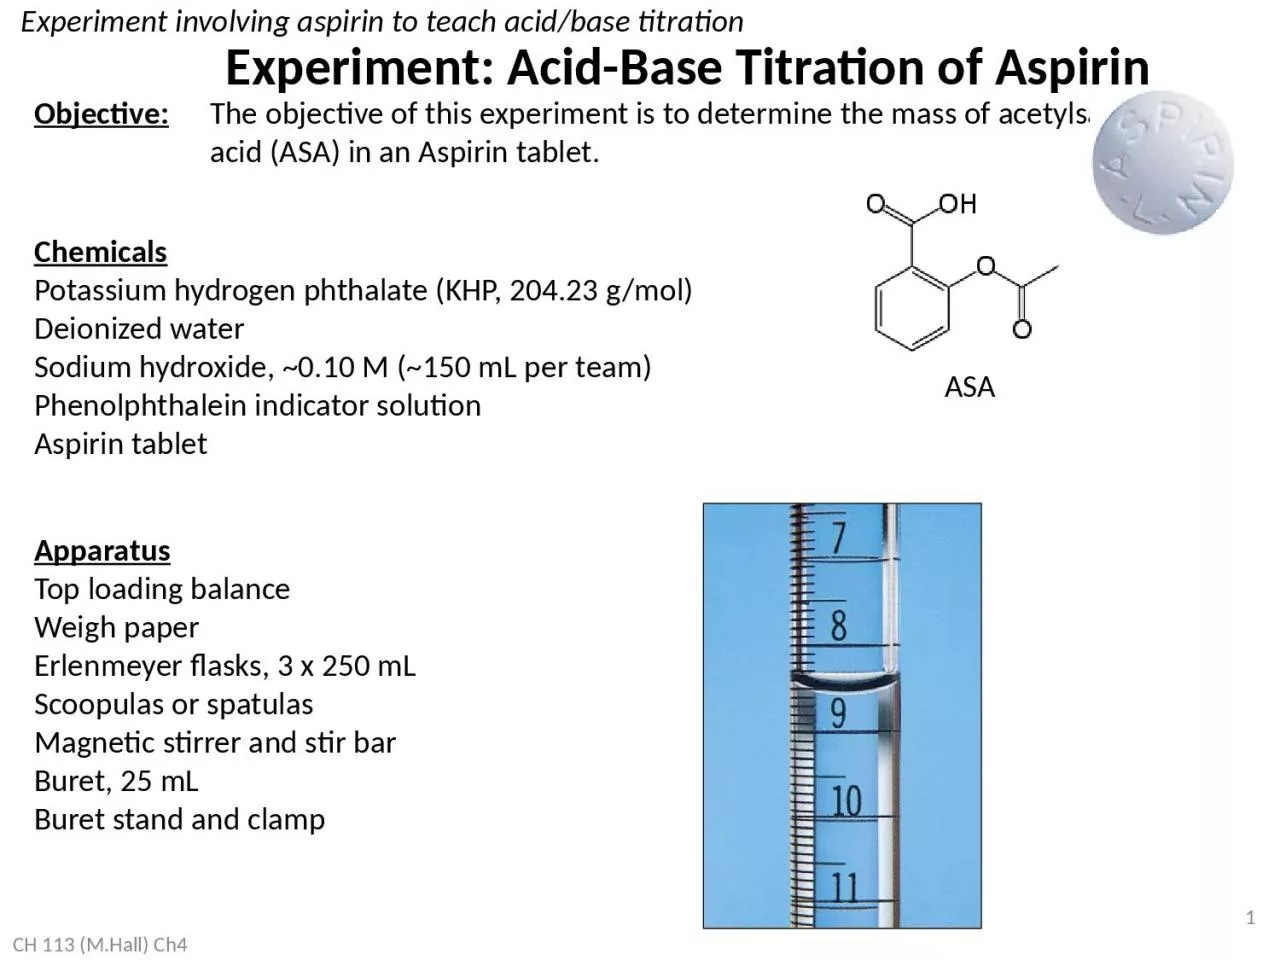 1 Objective: 	The objective of this experiment is to determine the mass of acetylsalicylic